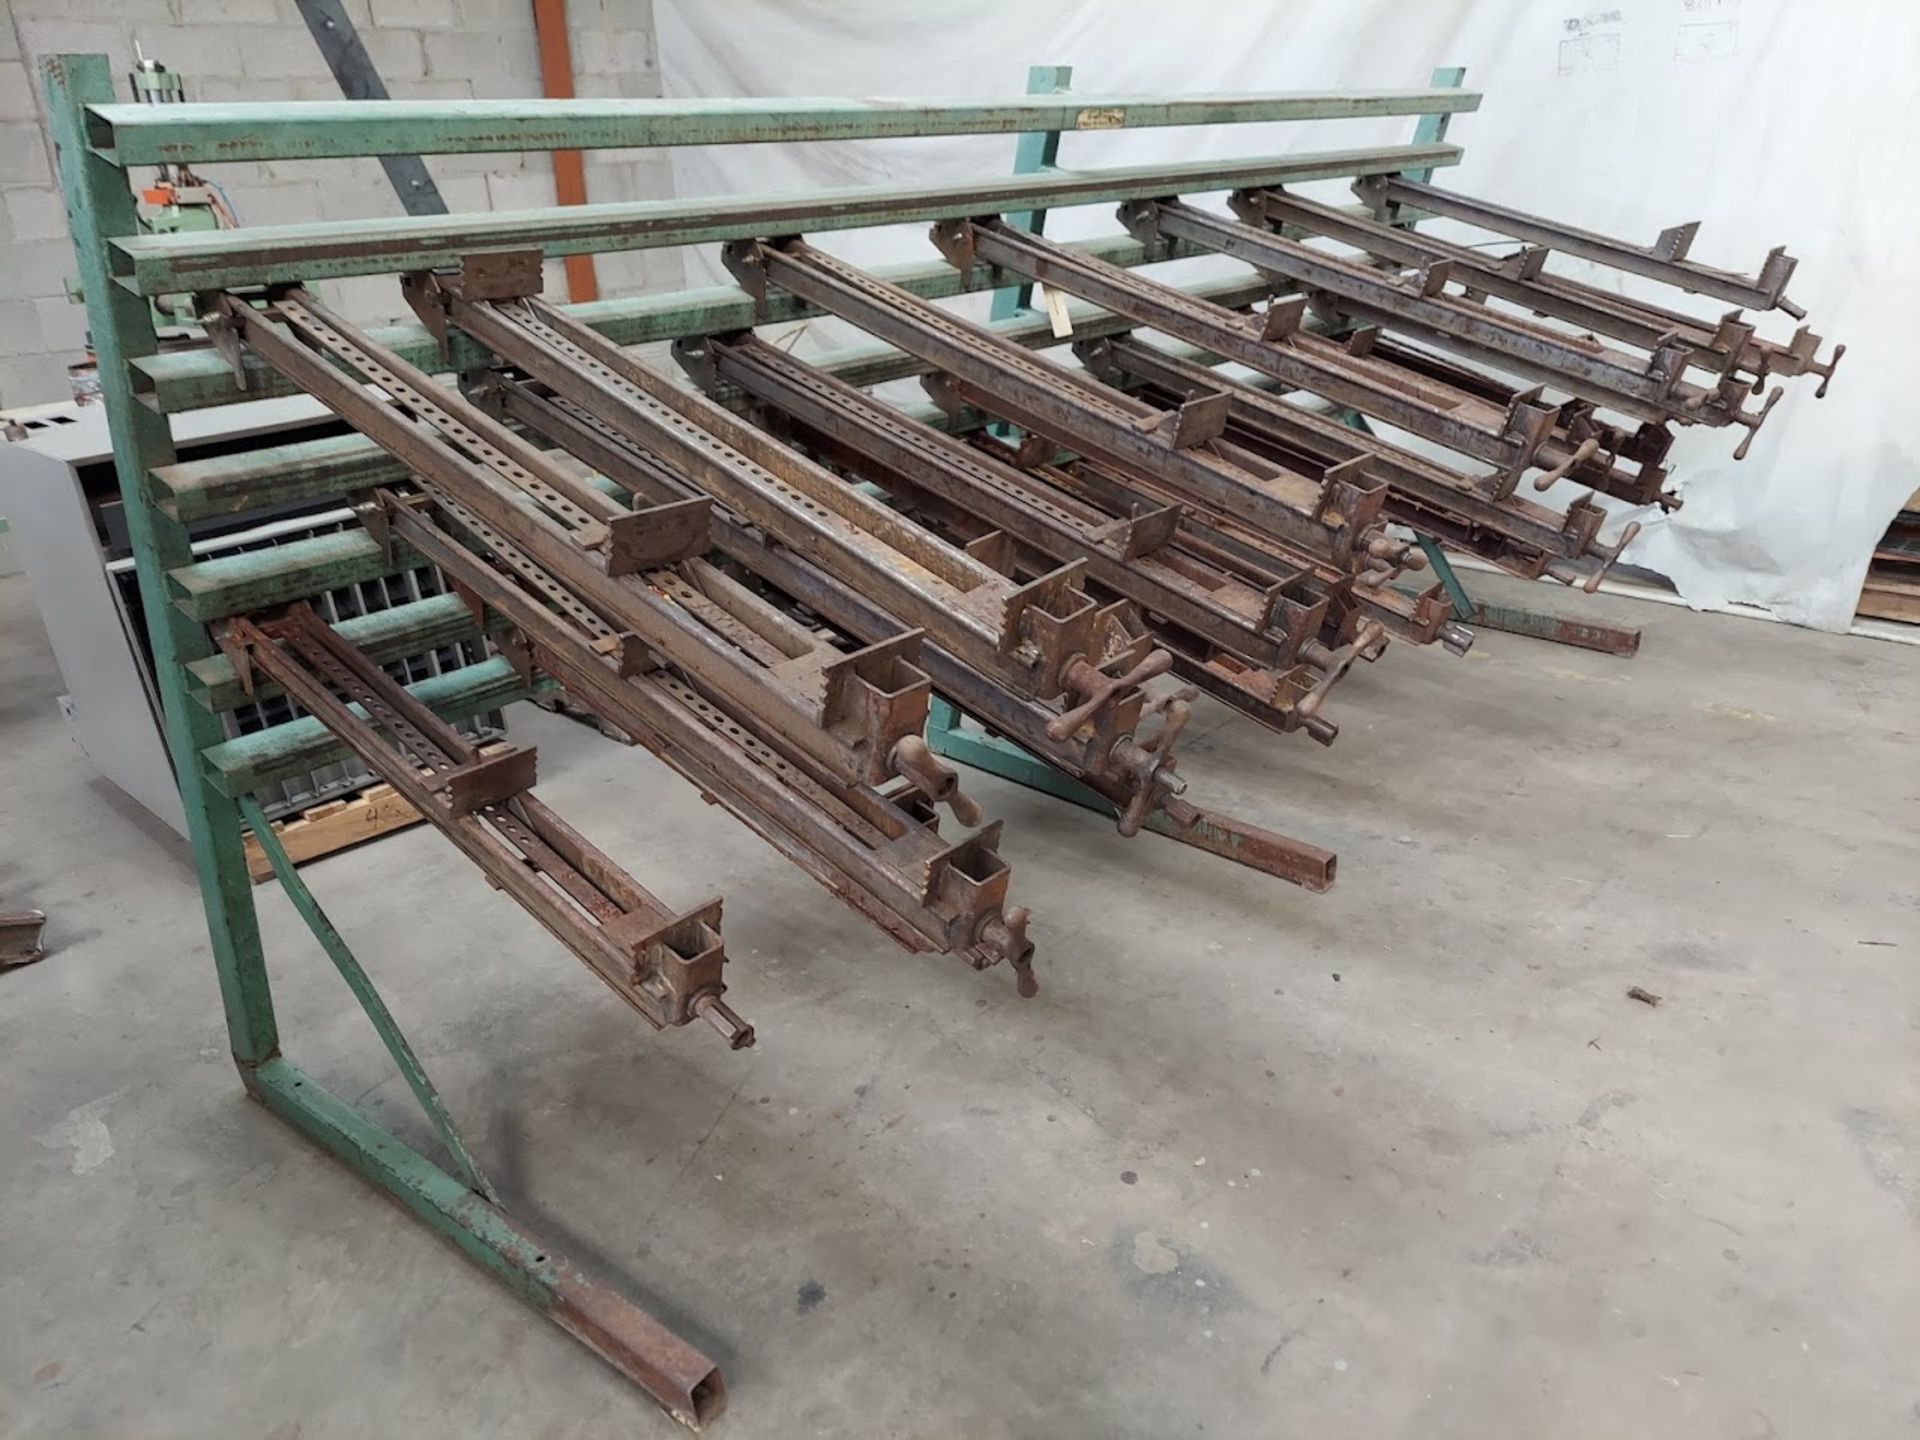 James L. Taylor 12' Panel Clamp, Model #79A, Comes with 29 Clamps, 16 - 32" Clamps & 13" 40" Clamps - Image 3 of 4